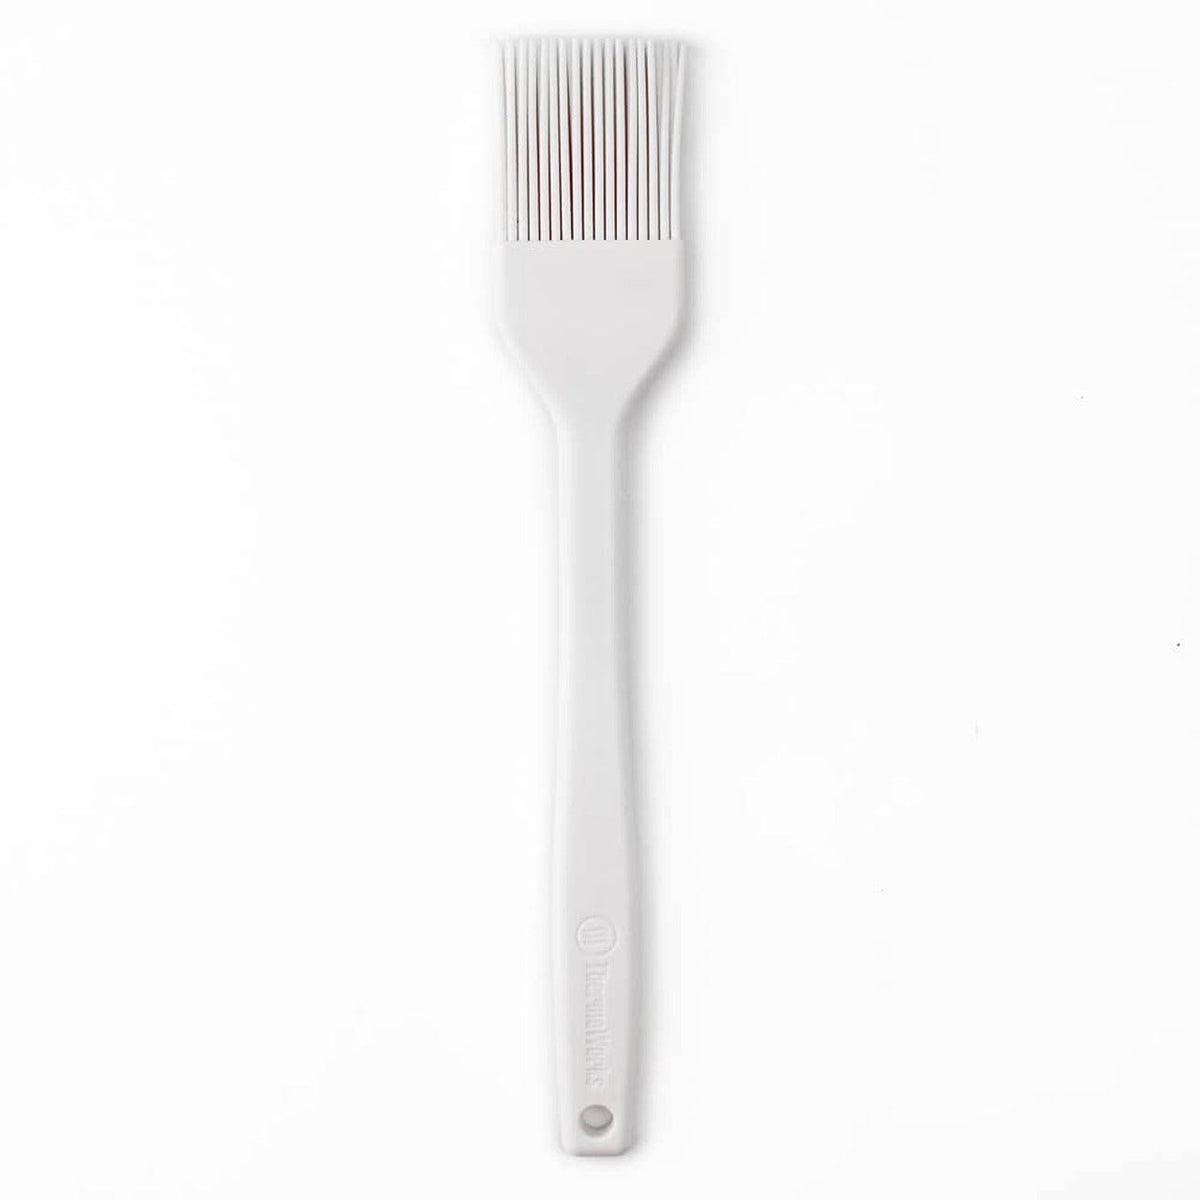 Hi-Temp Silicone Brushes - ThermoWorks